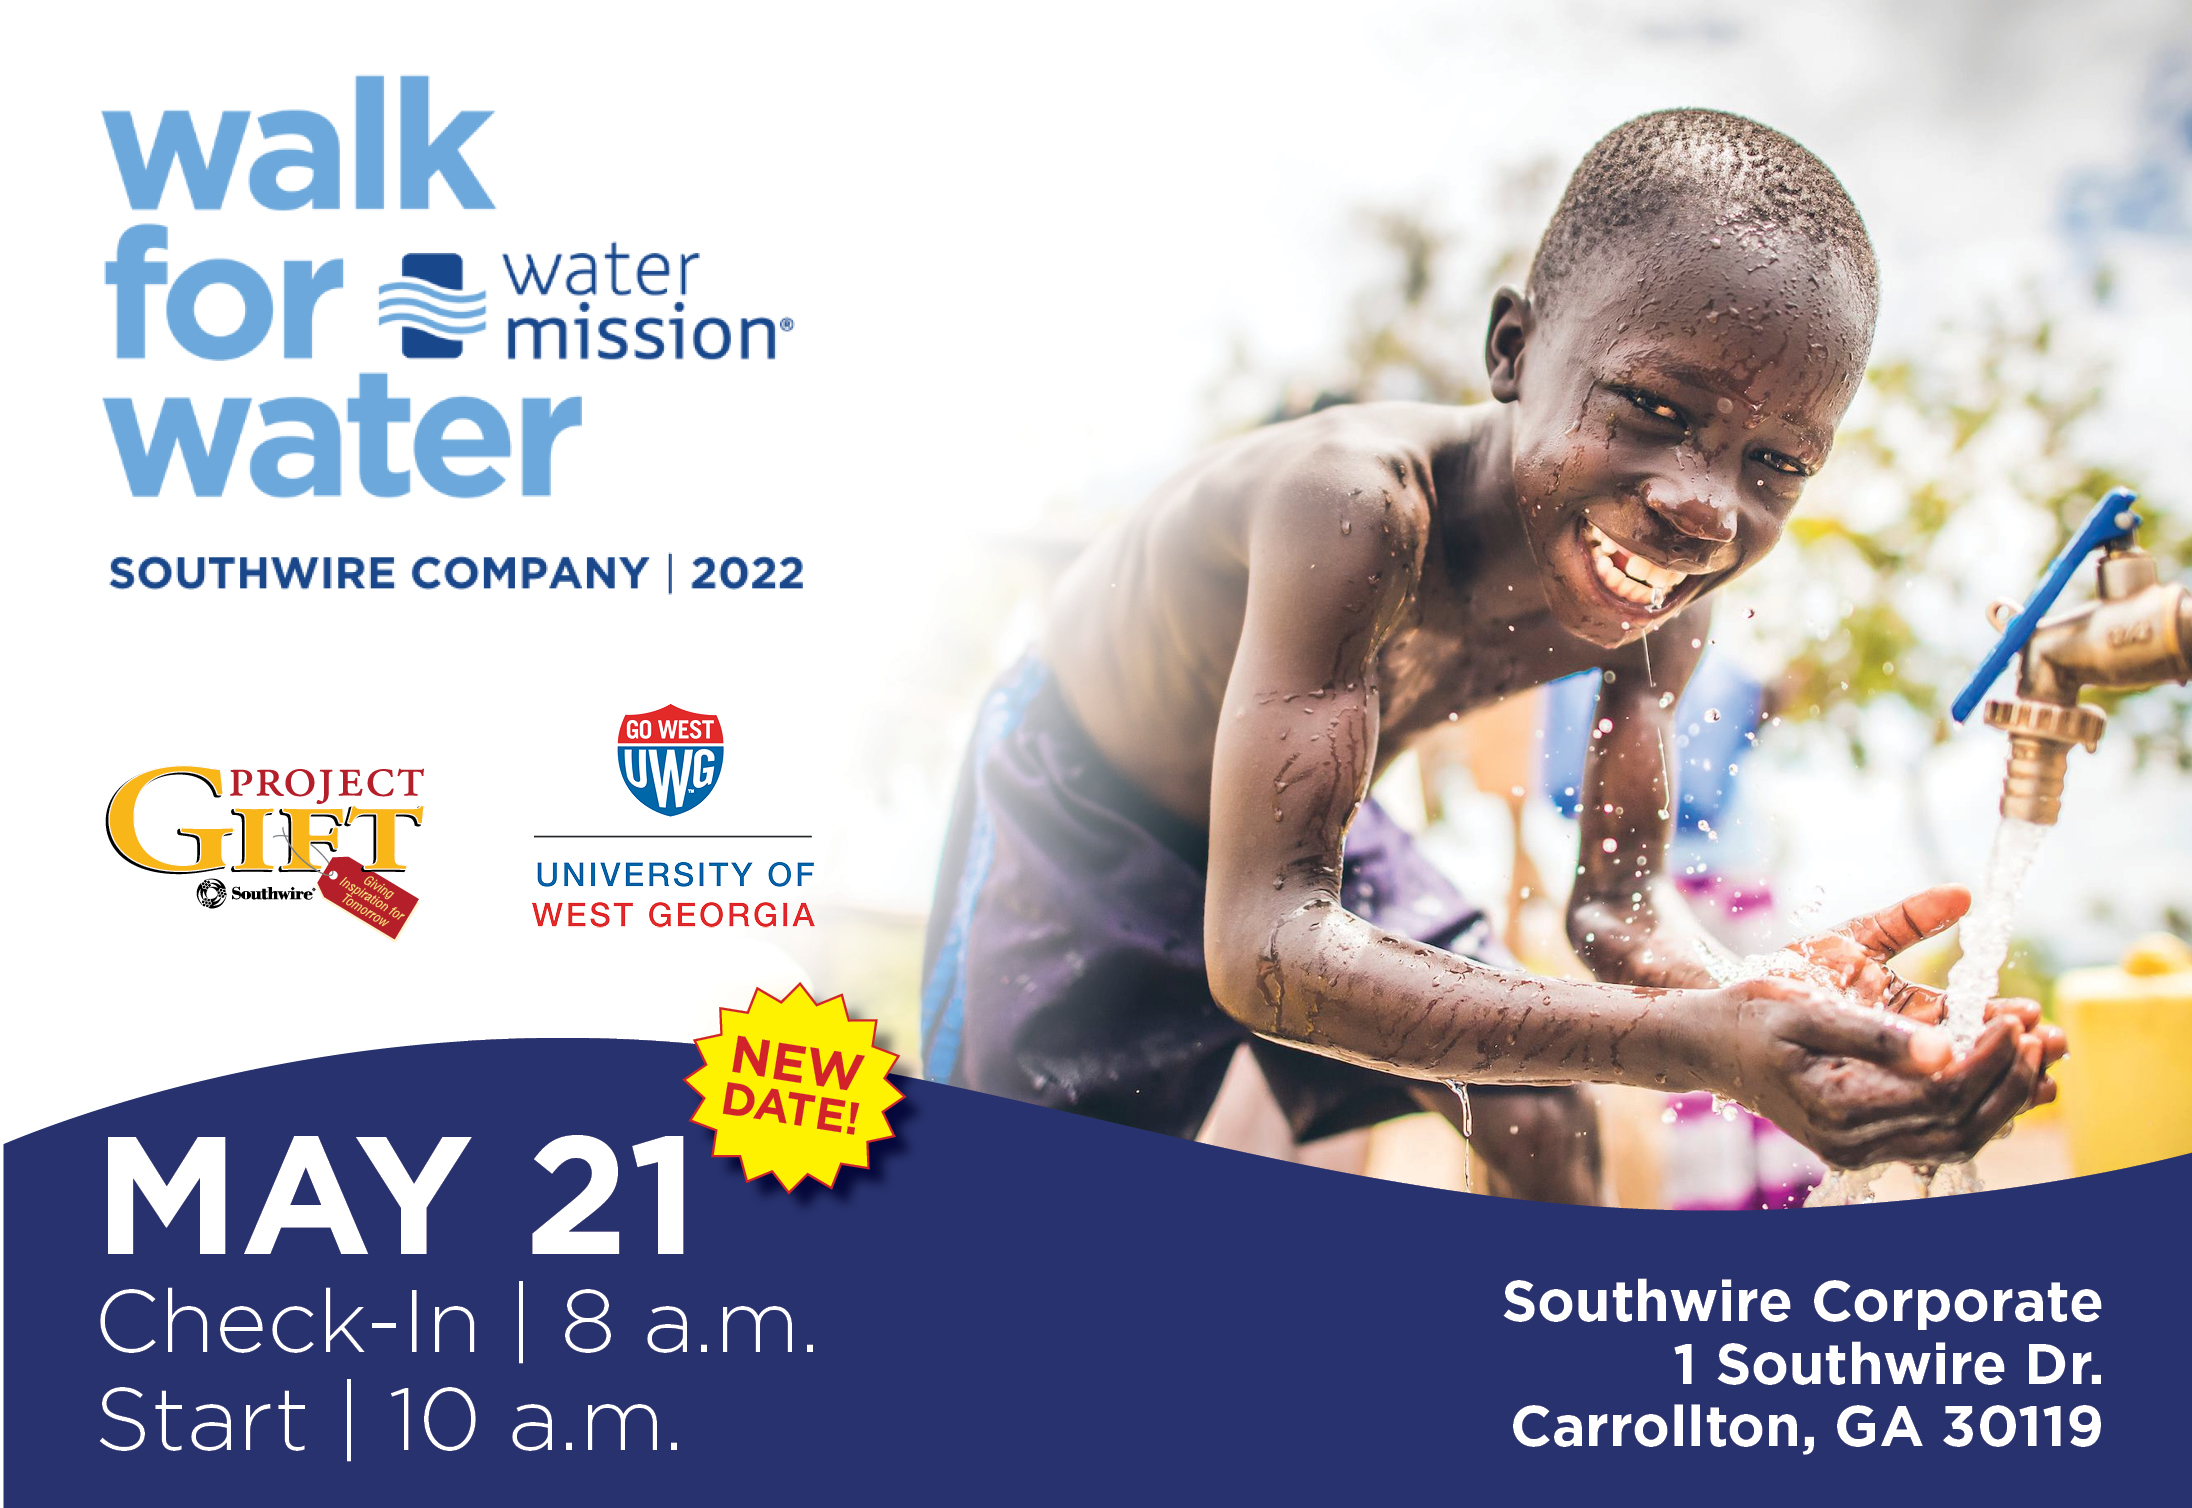 Southwire's Project GIFT to Host Walk for Water in Carrollton